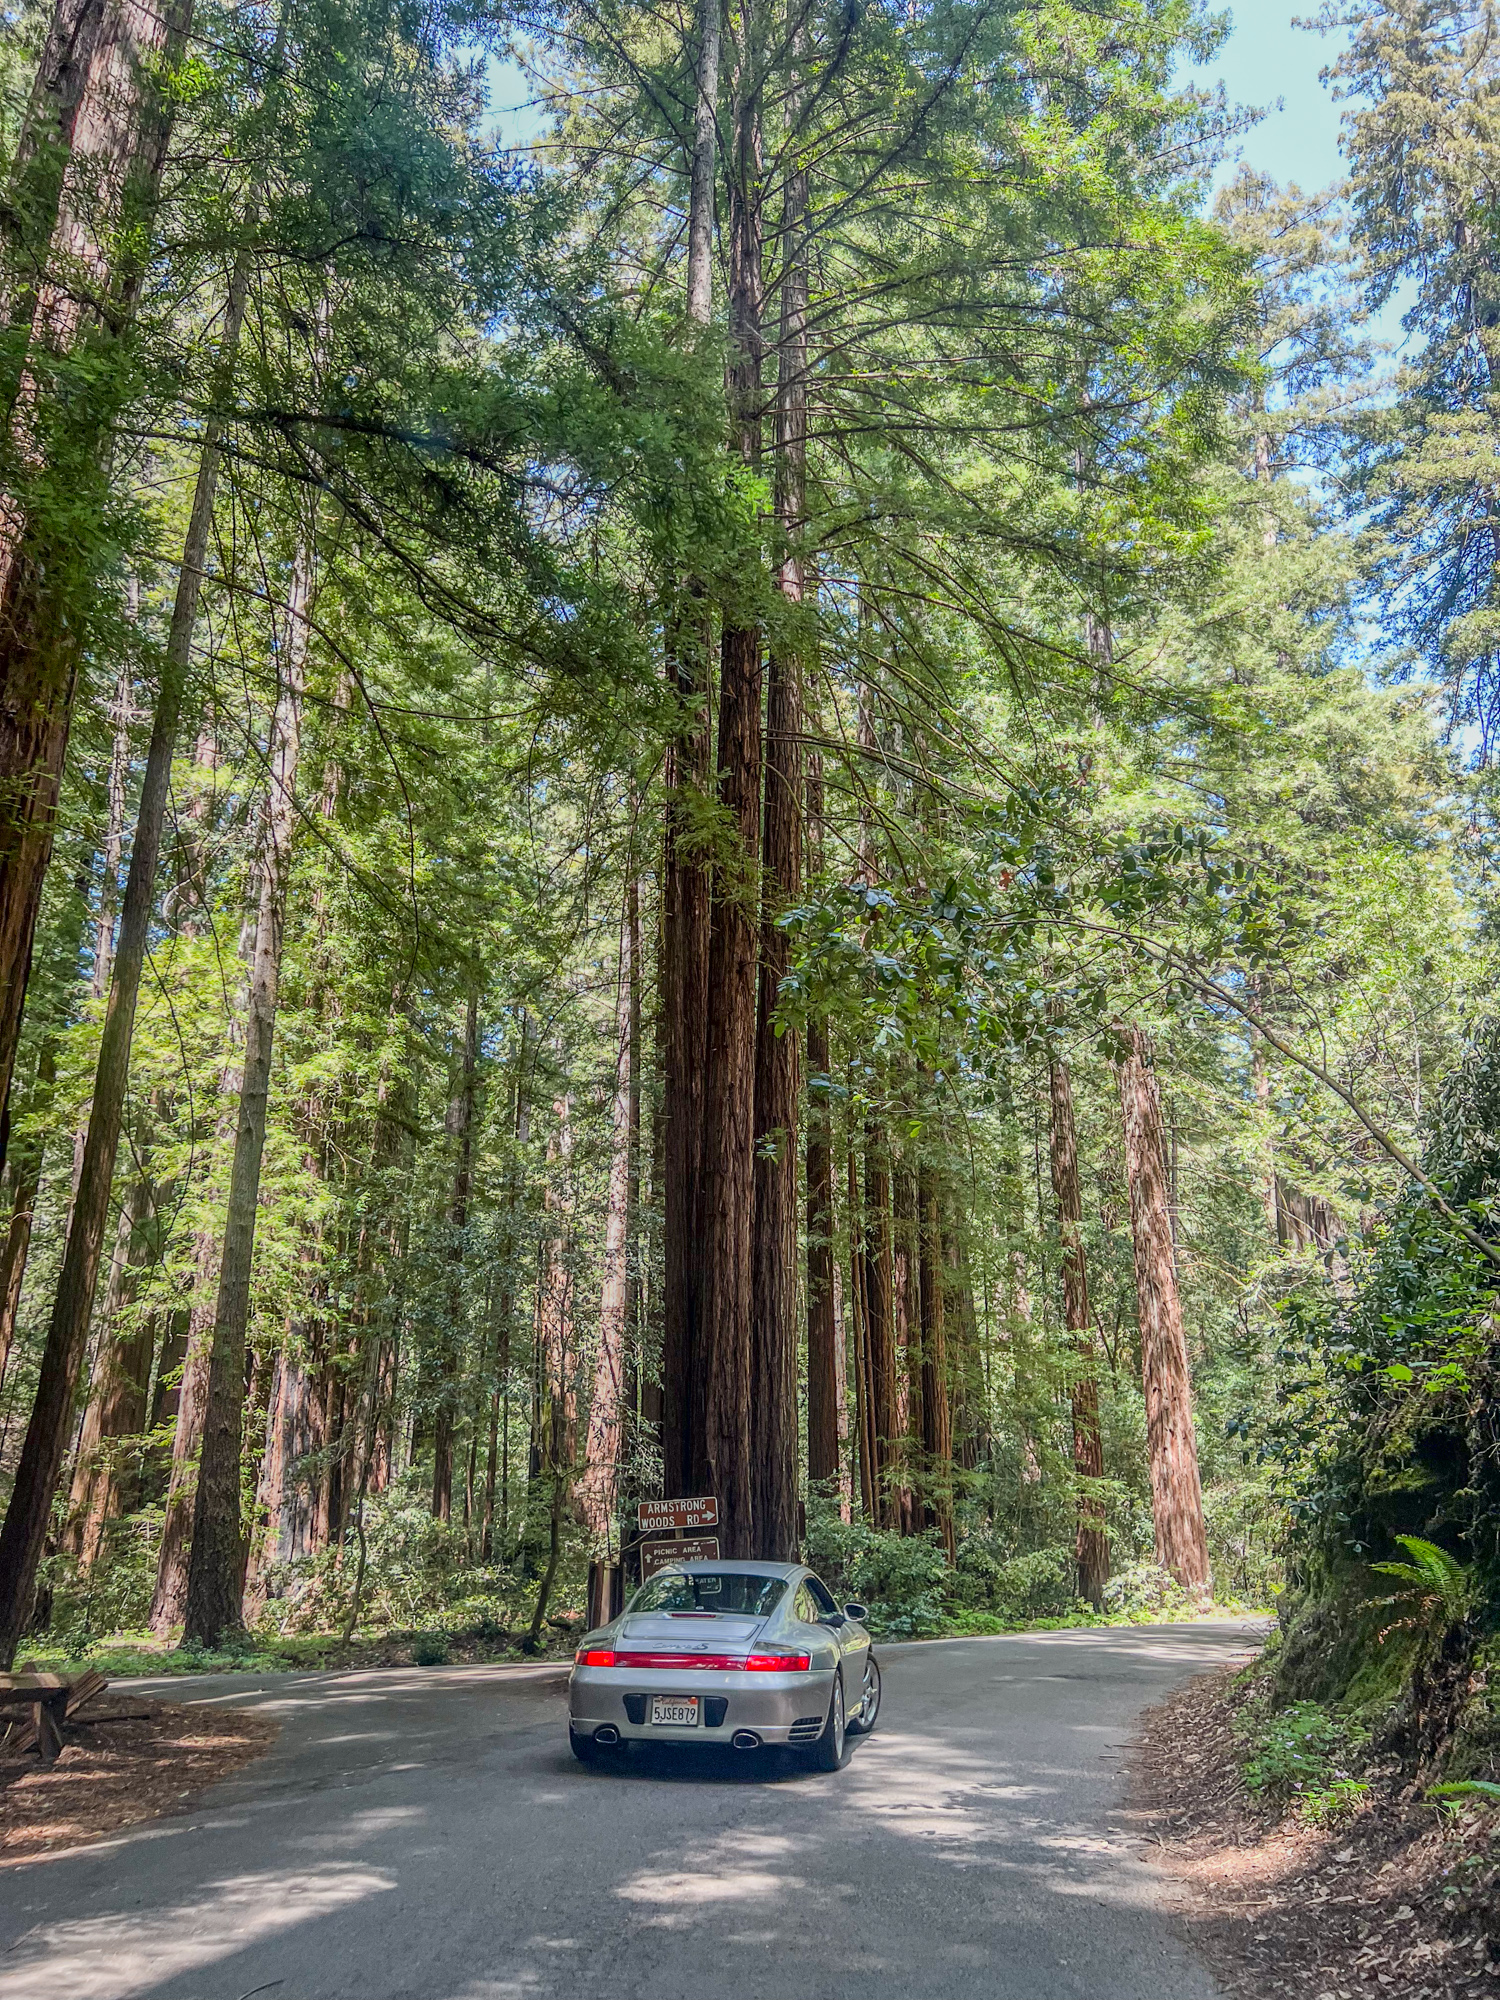 Driving into Armstrong Redwoods State Natural Reserve in Northern California